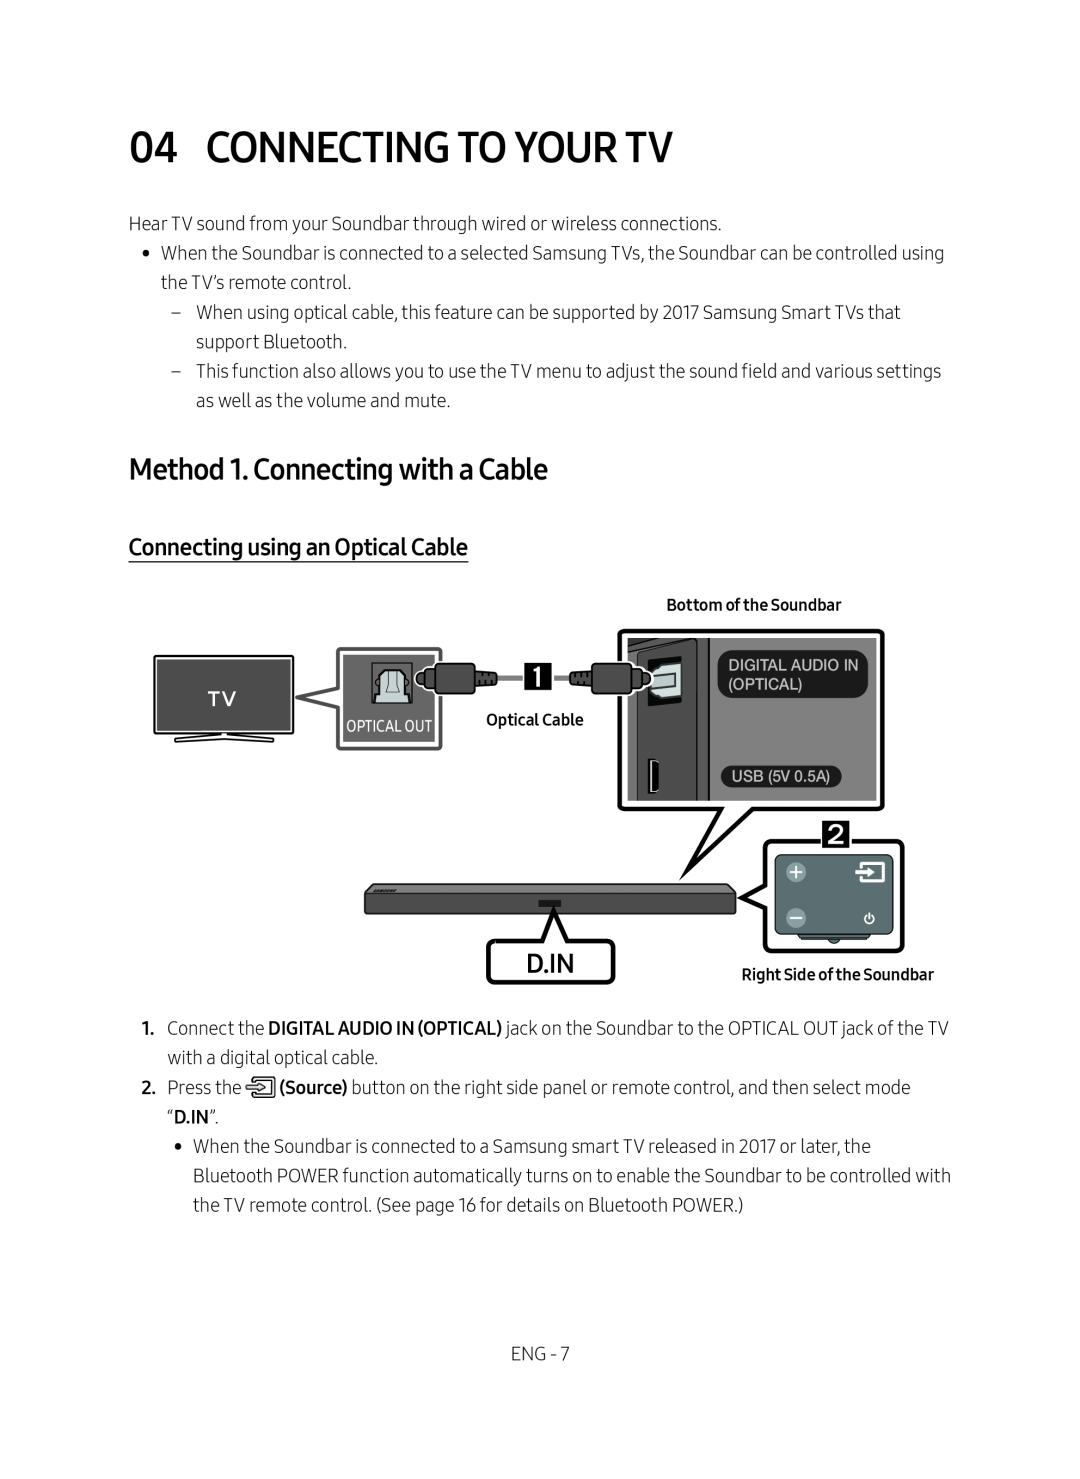 Samsung HW-M450/ZF manual Connecting To Your Tv, Method 1. Connecting with a Cable, D.In, Connecting using an Optical Cable 